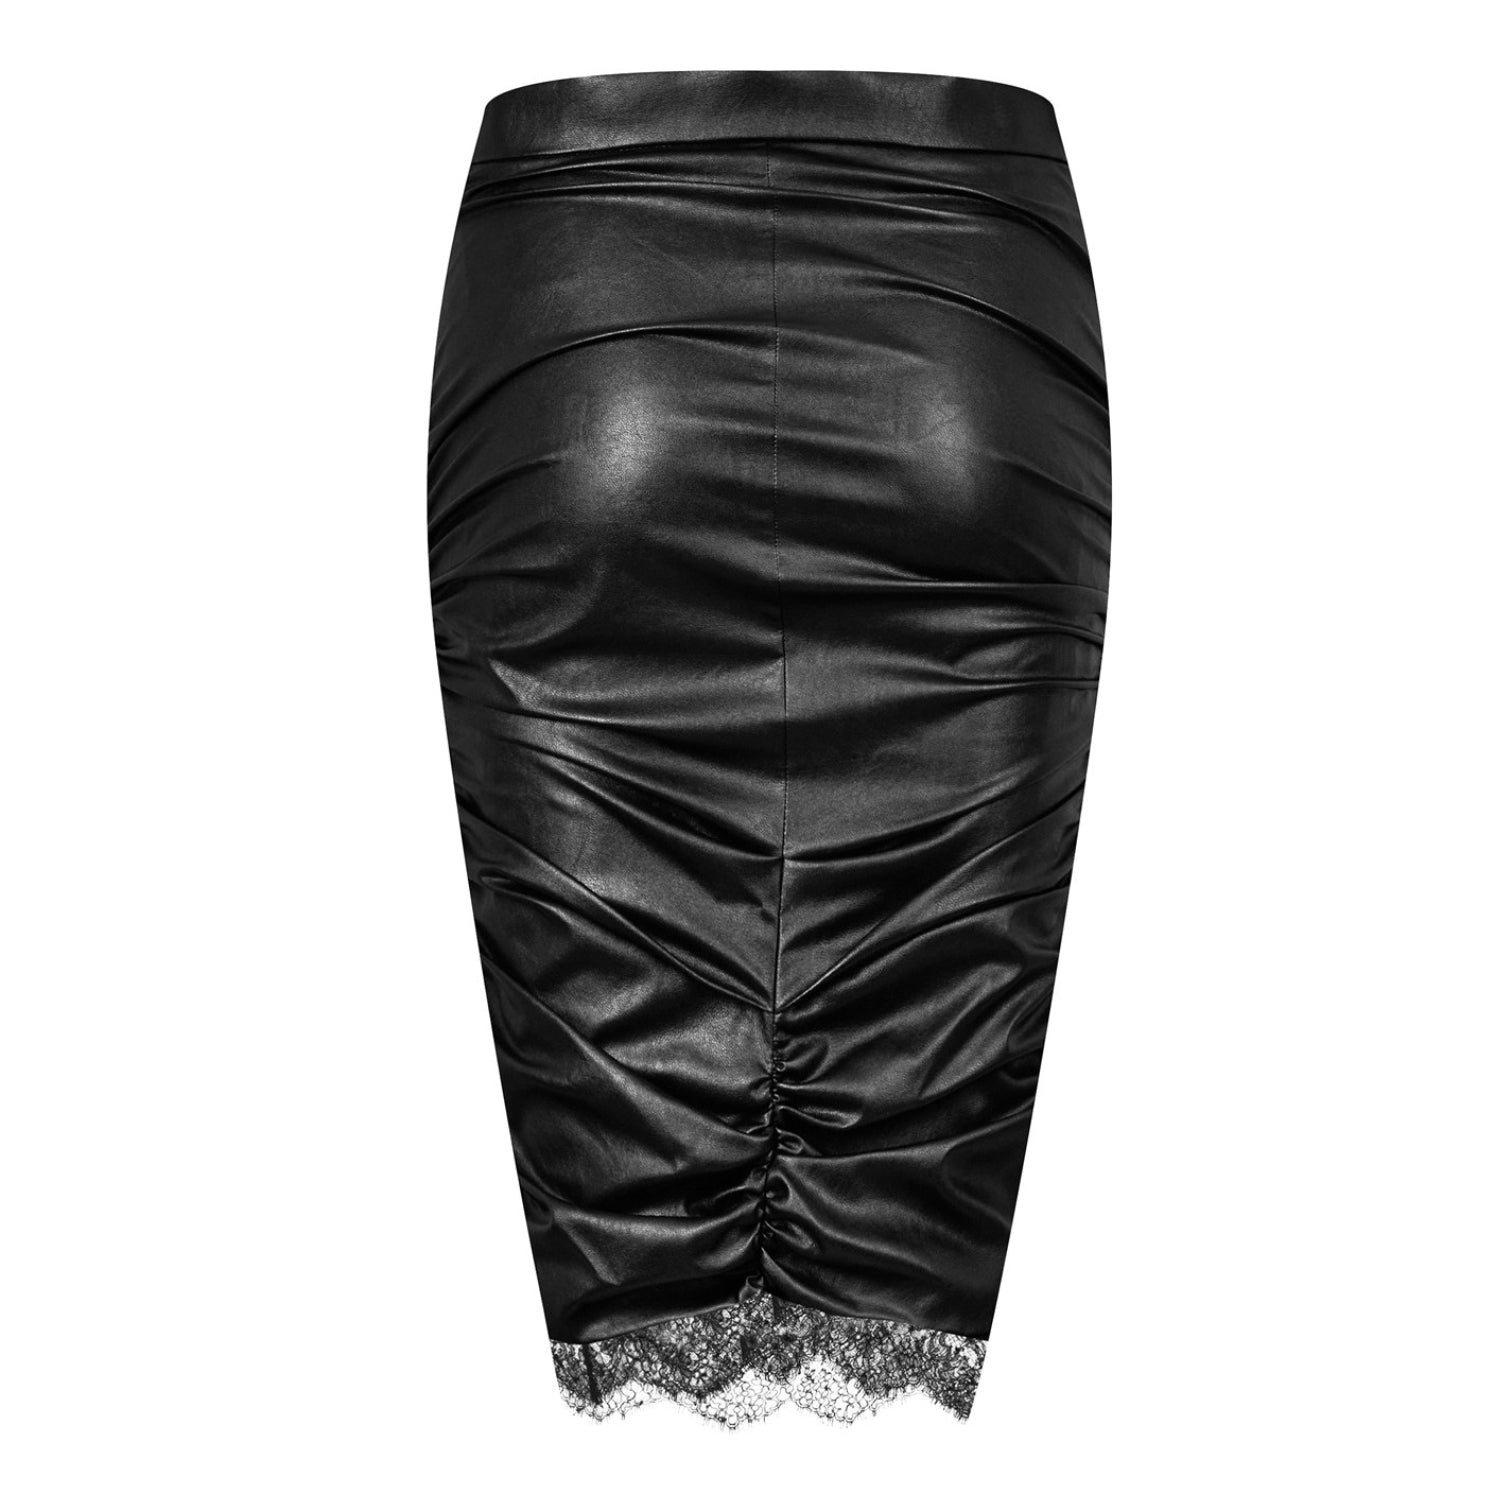 LUXURY HUB TOM FORD FAUX LEATHER RUCHED MIDI SKIRT